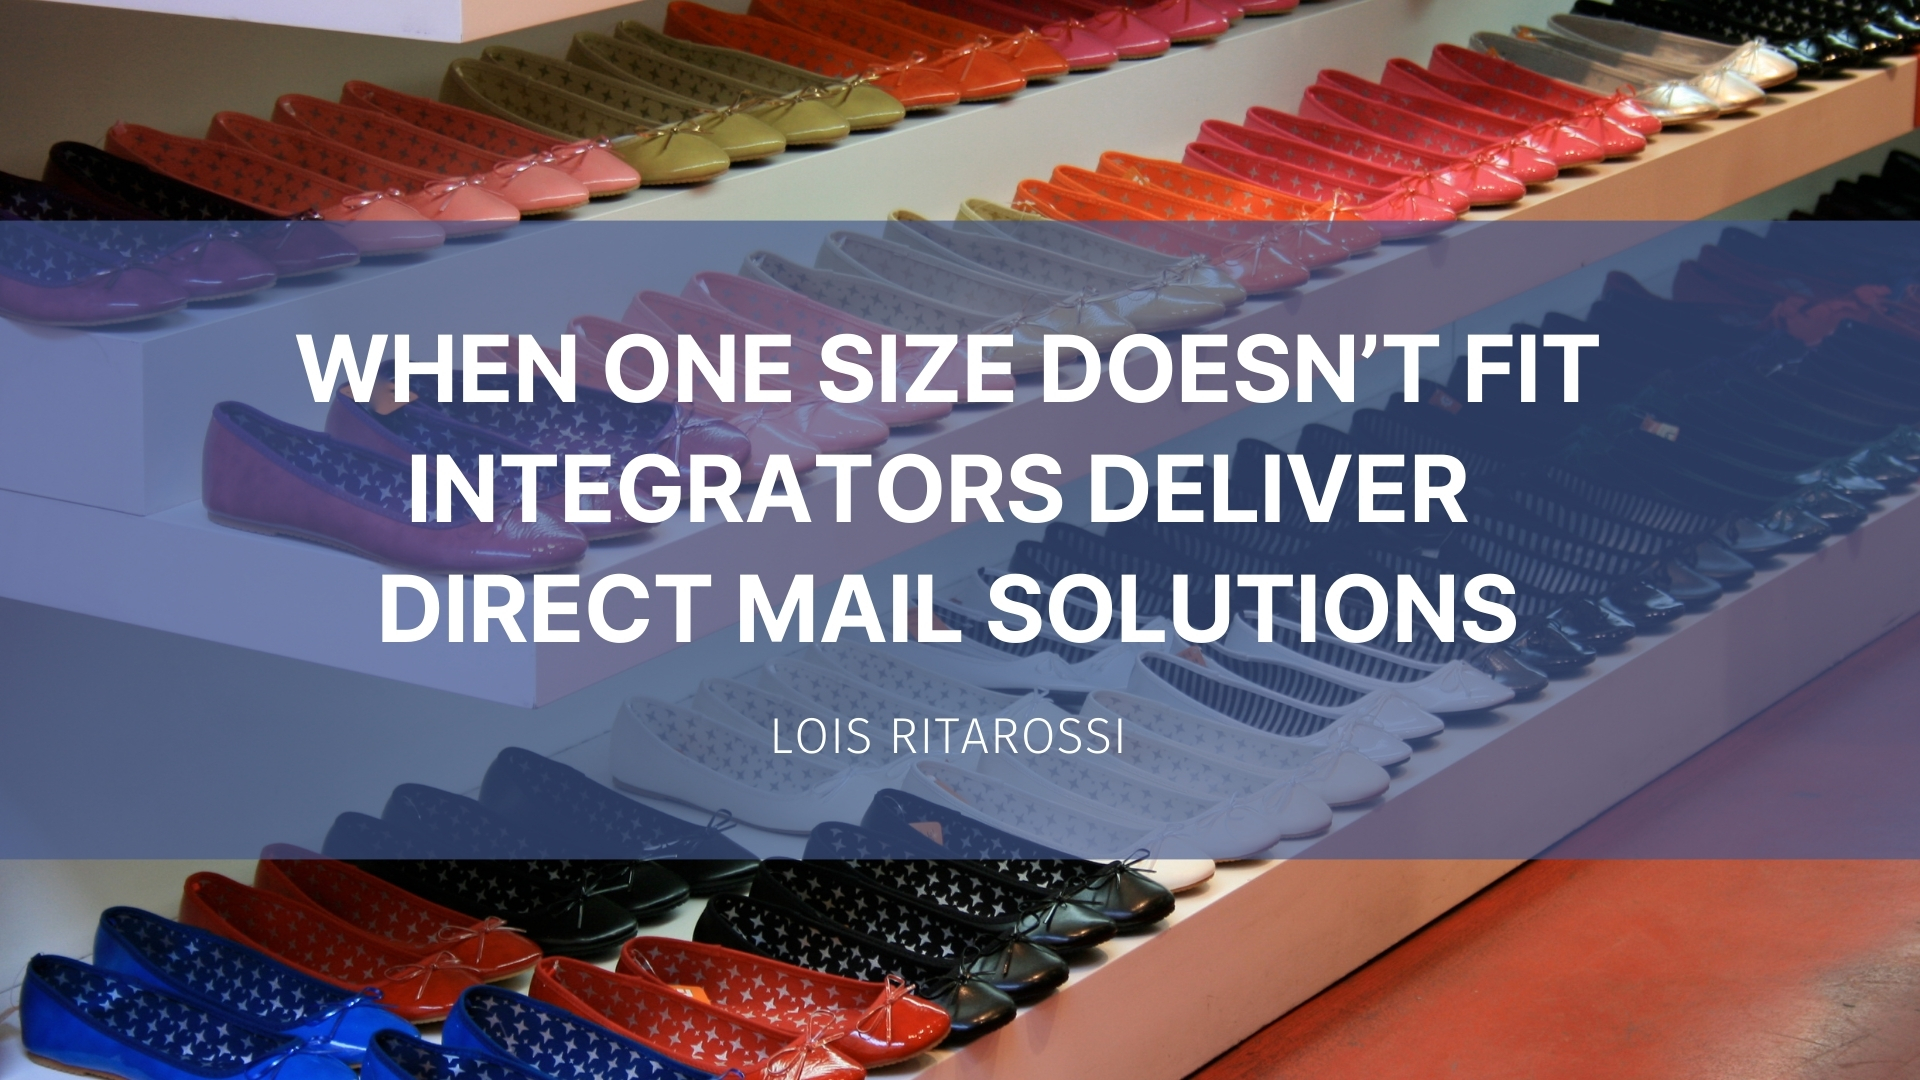 Featured image for “When One Size Doesn’t Fit . . . Integrators Deliver Direct Mail Solutions”